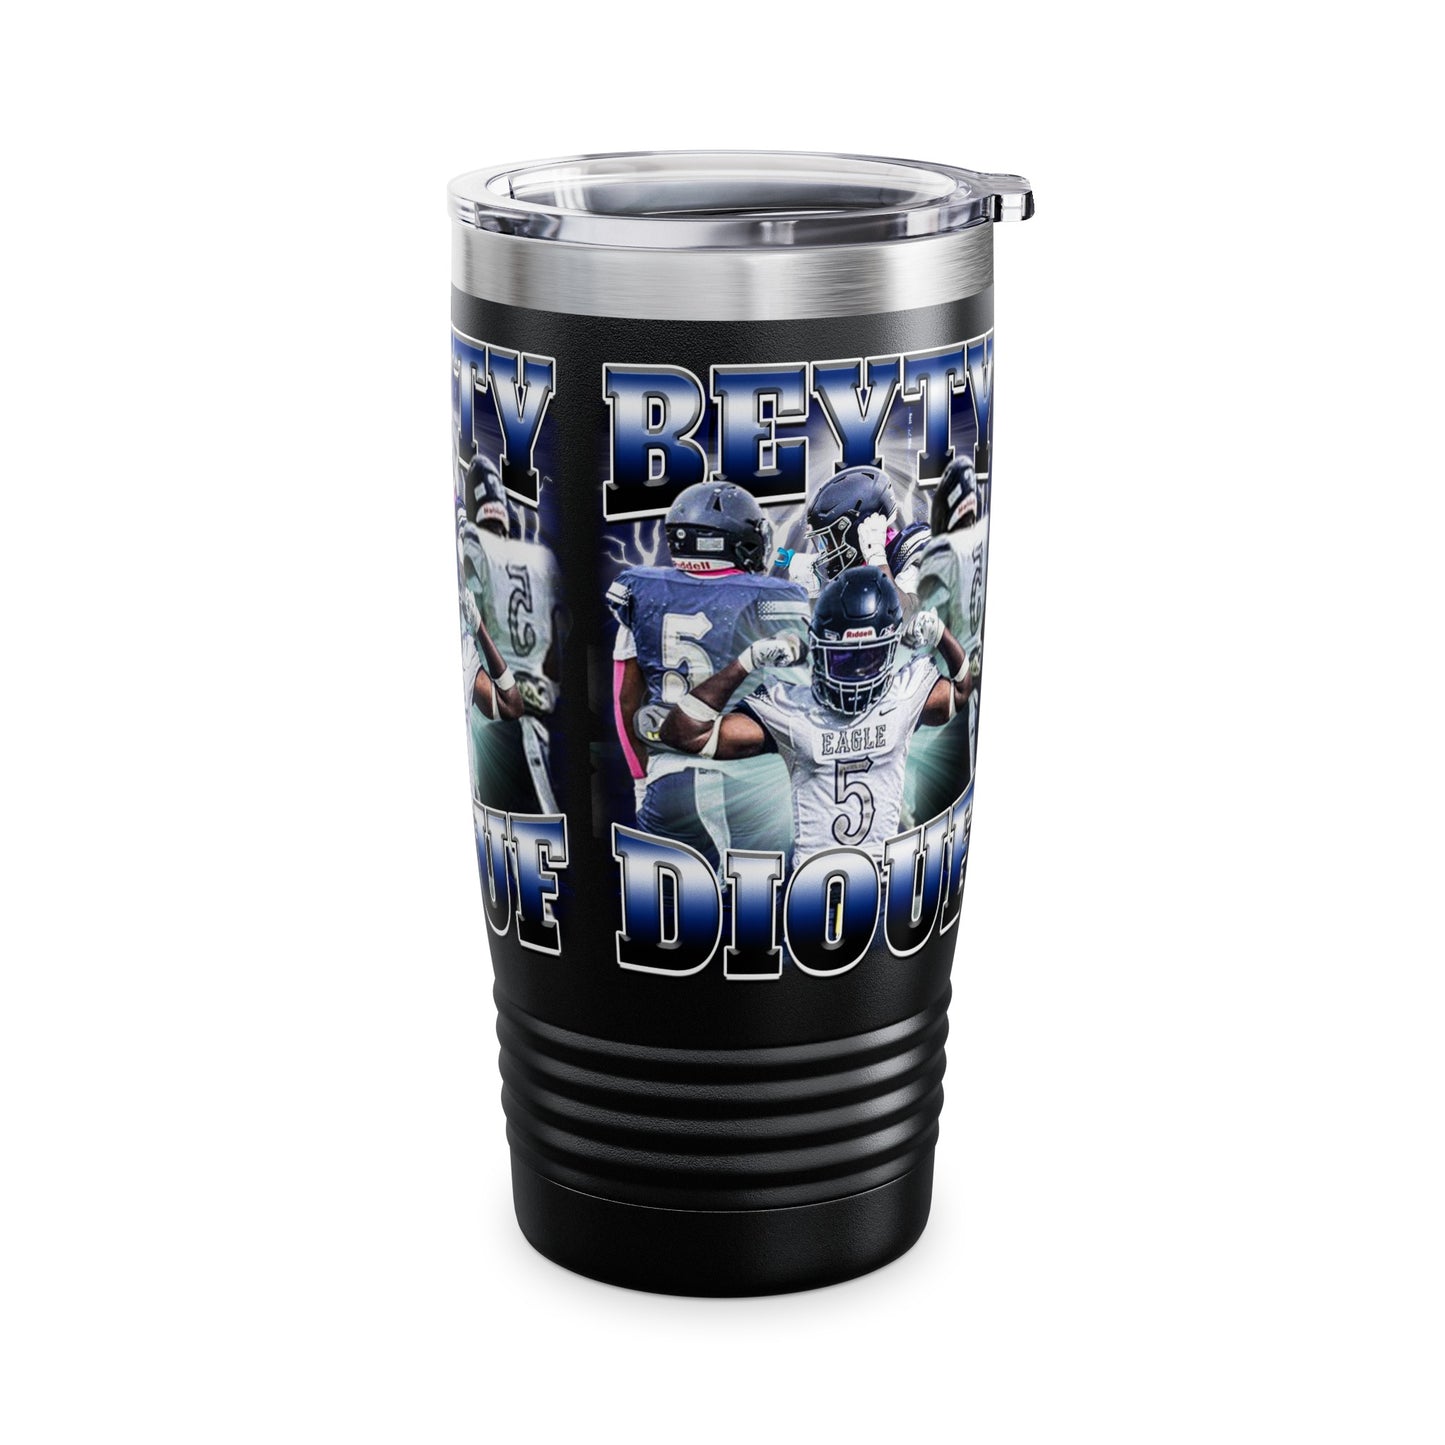 Beyty Diouf Stainless Steal Tumbler